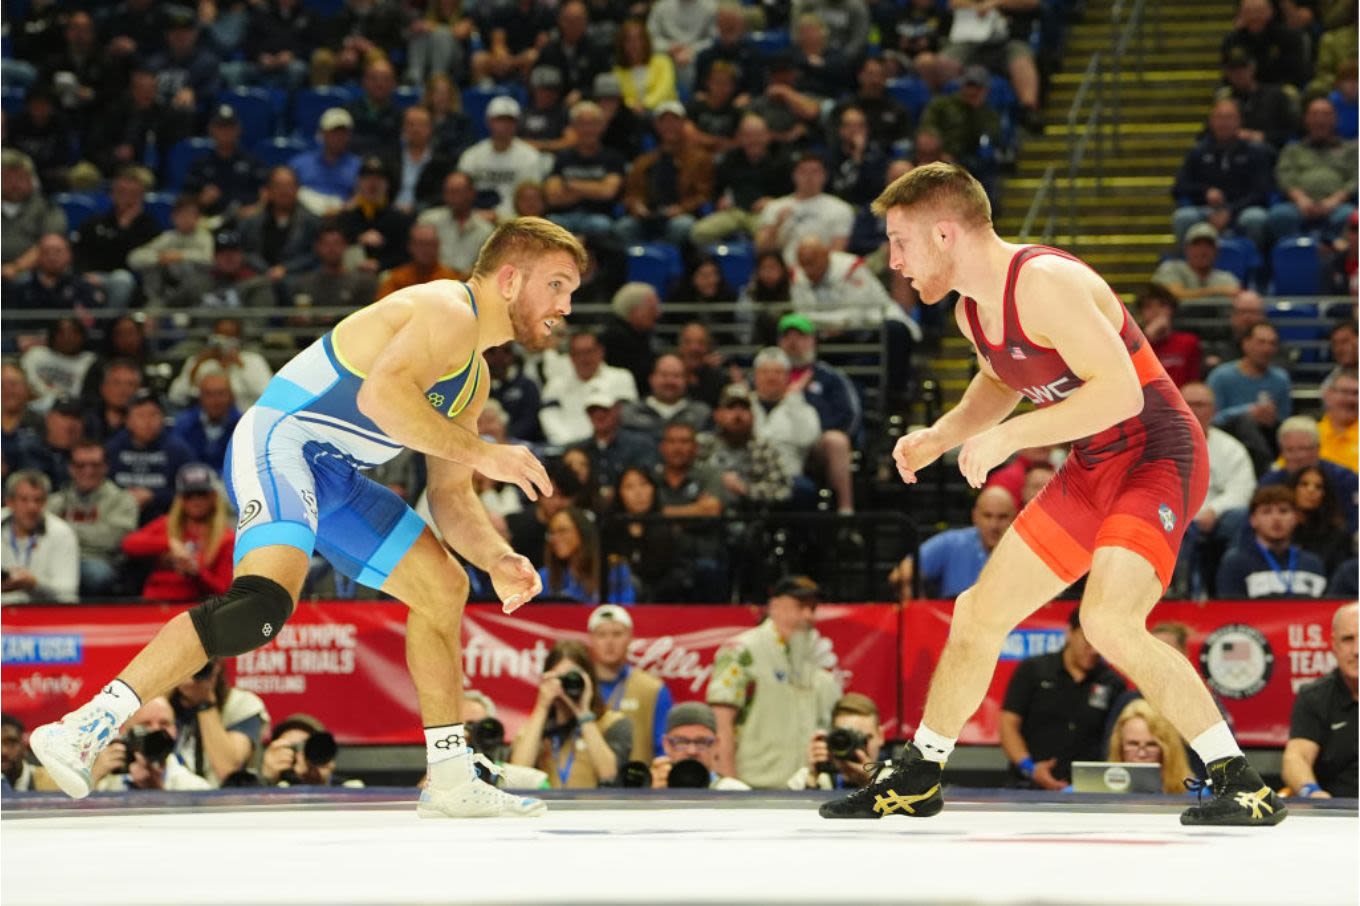 How to Watch Olympic Wrestling at the Paris 2024 Games Live Online Free